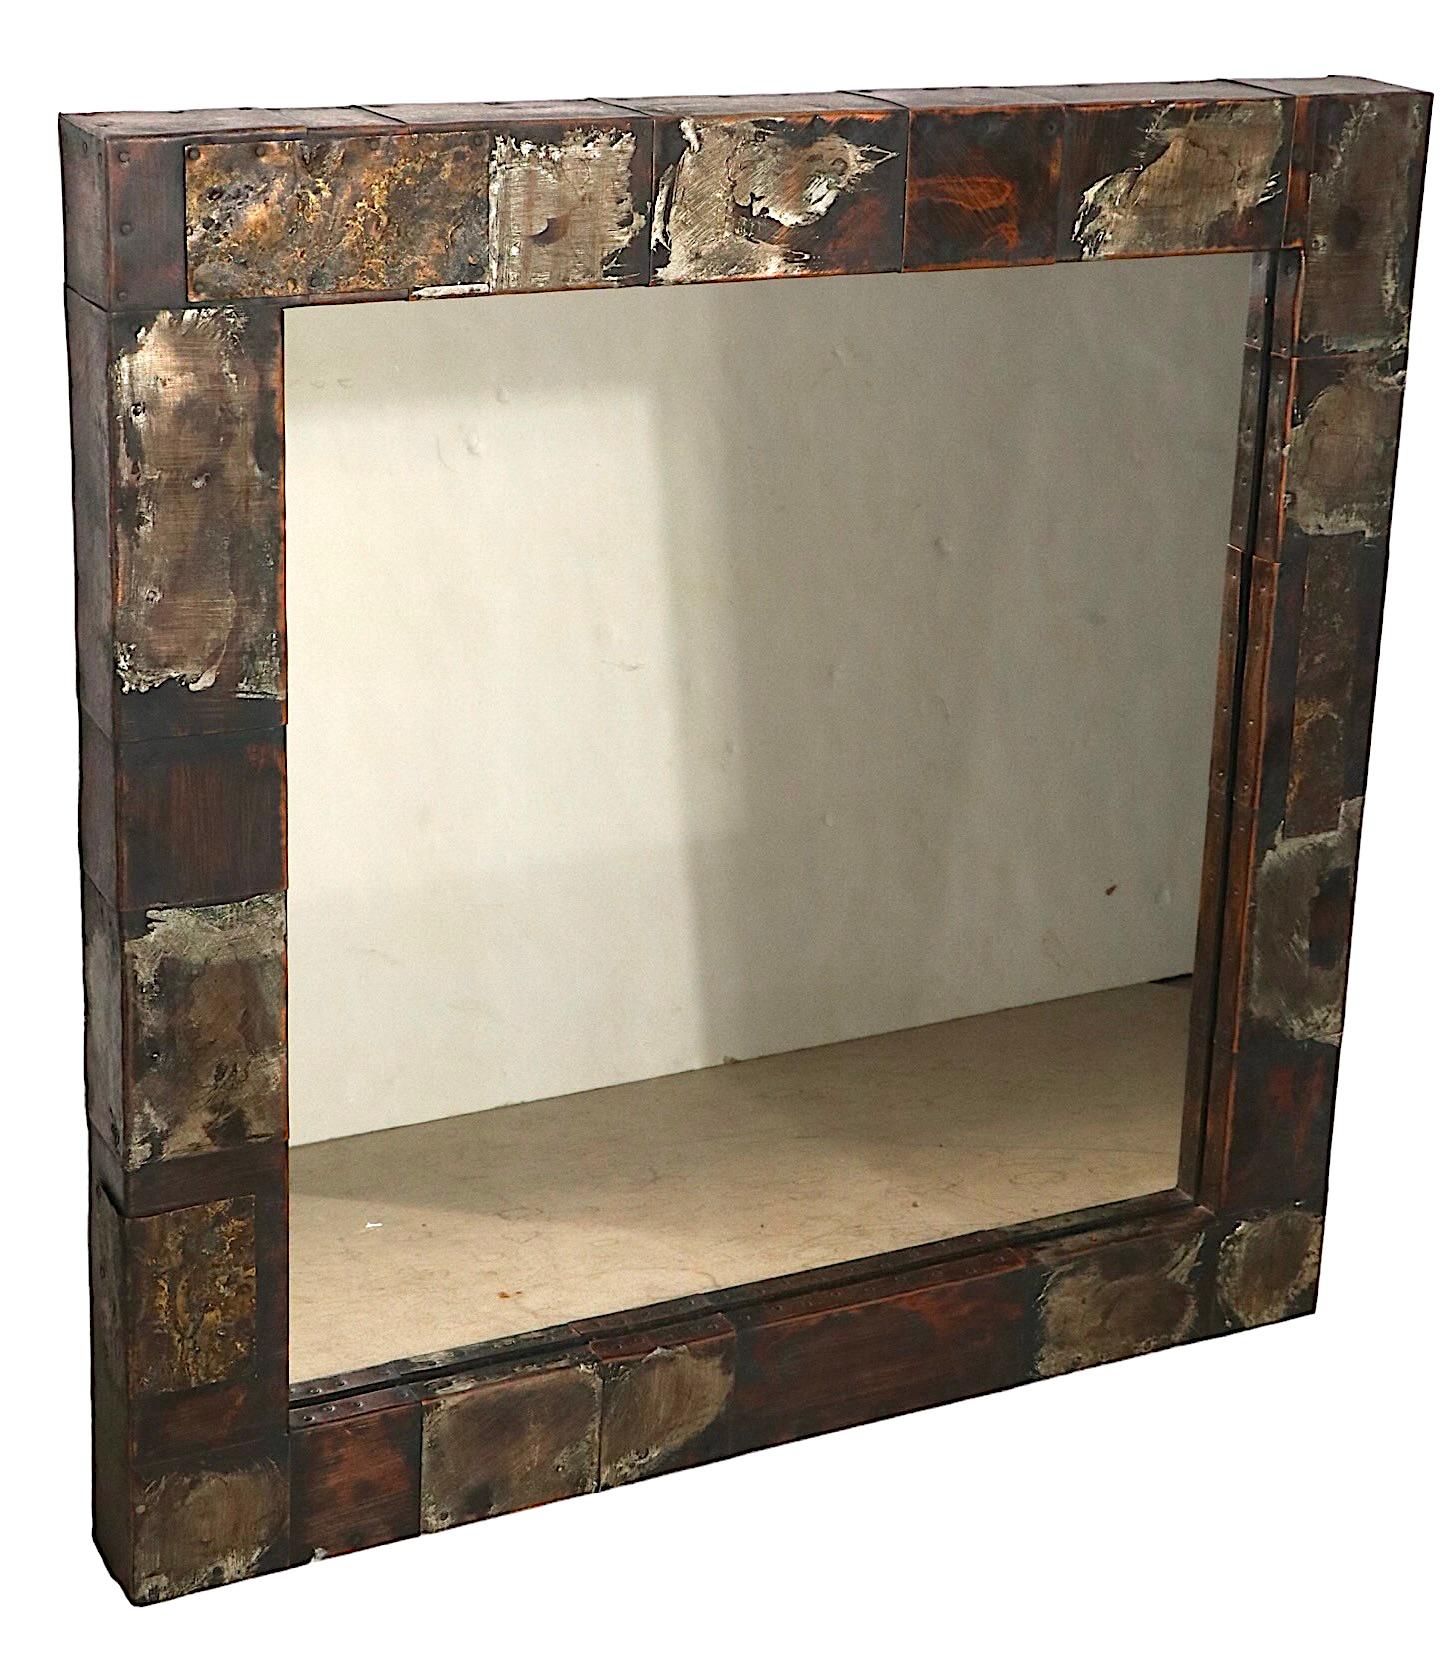 Extra Long Brutalist Wall Mount Shelf and Matching Wall Mirror by Paul Evans In Good Condition For Sale In New York, NY